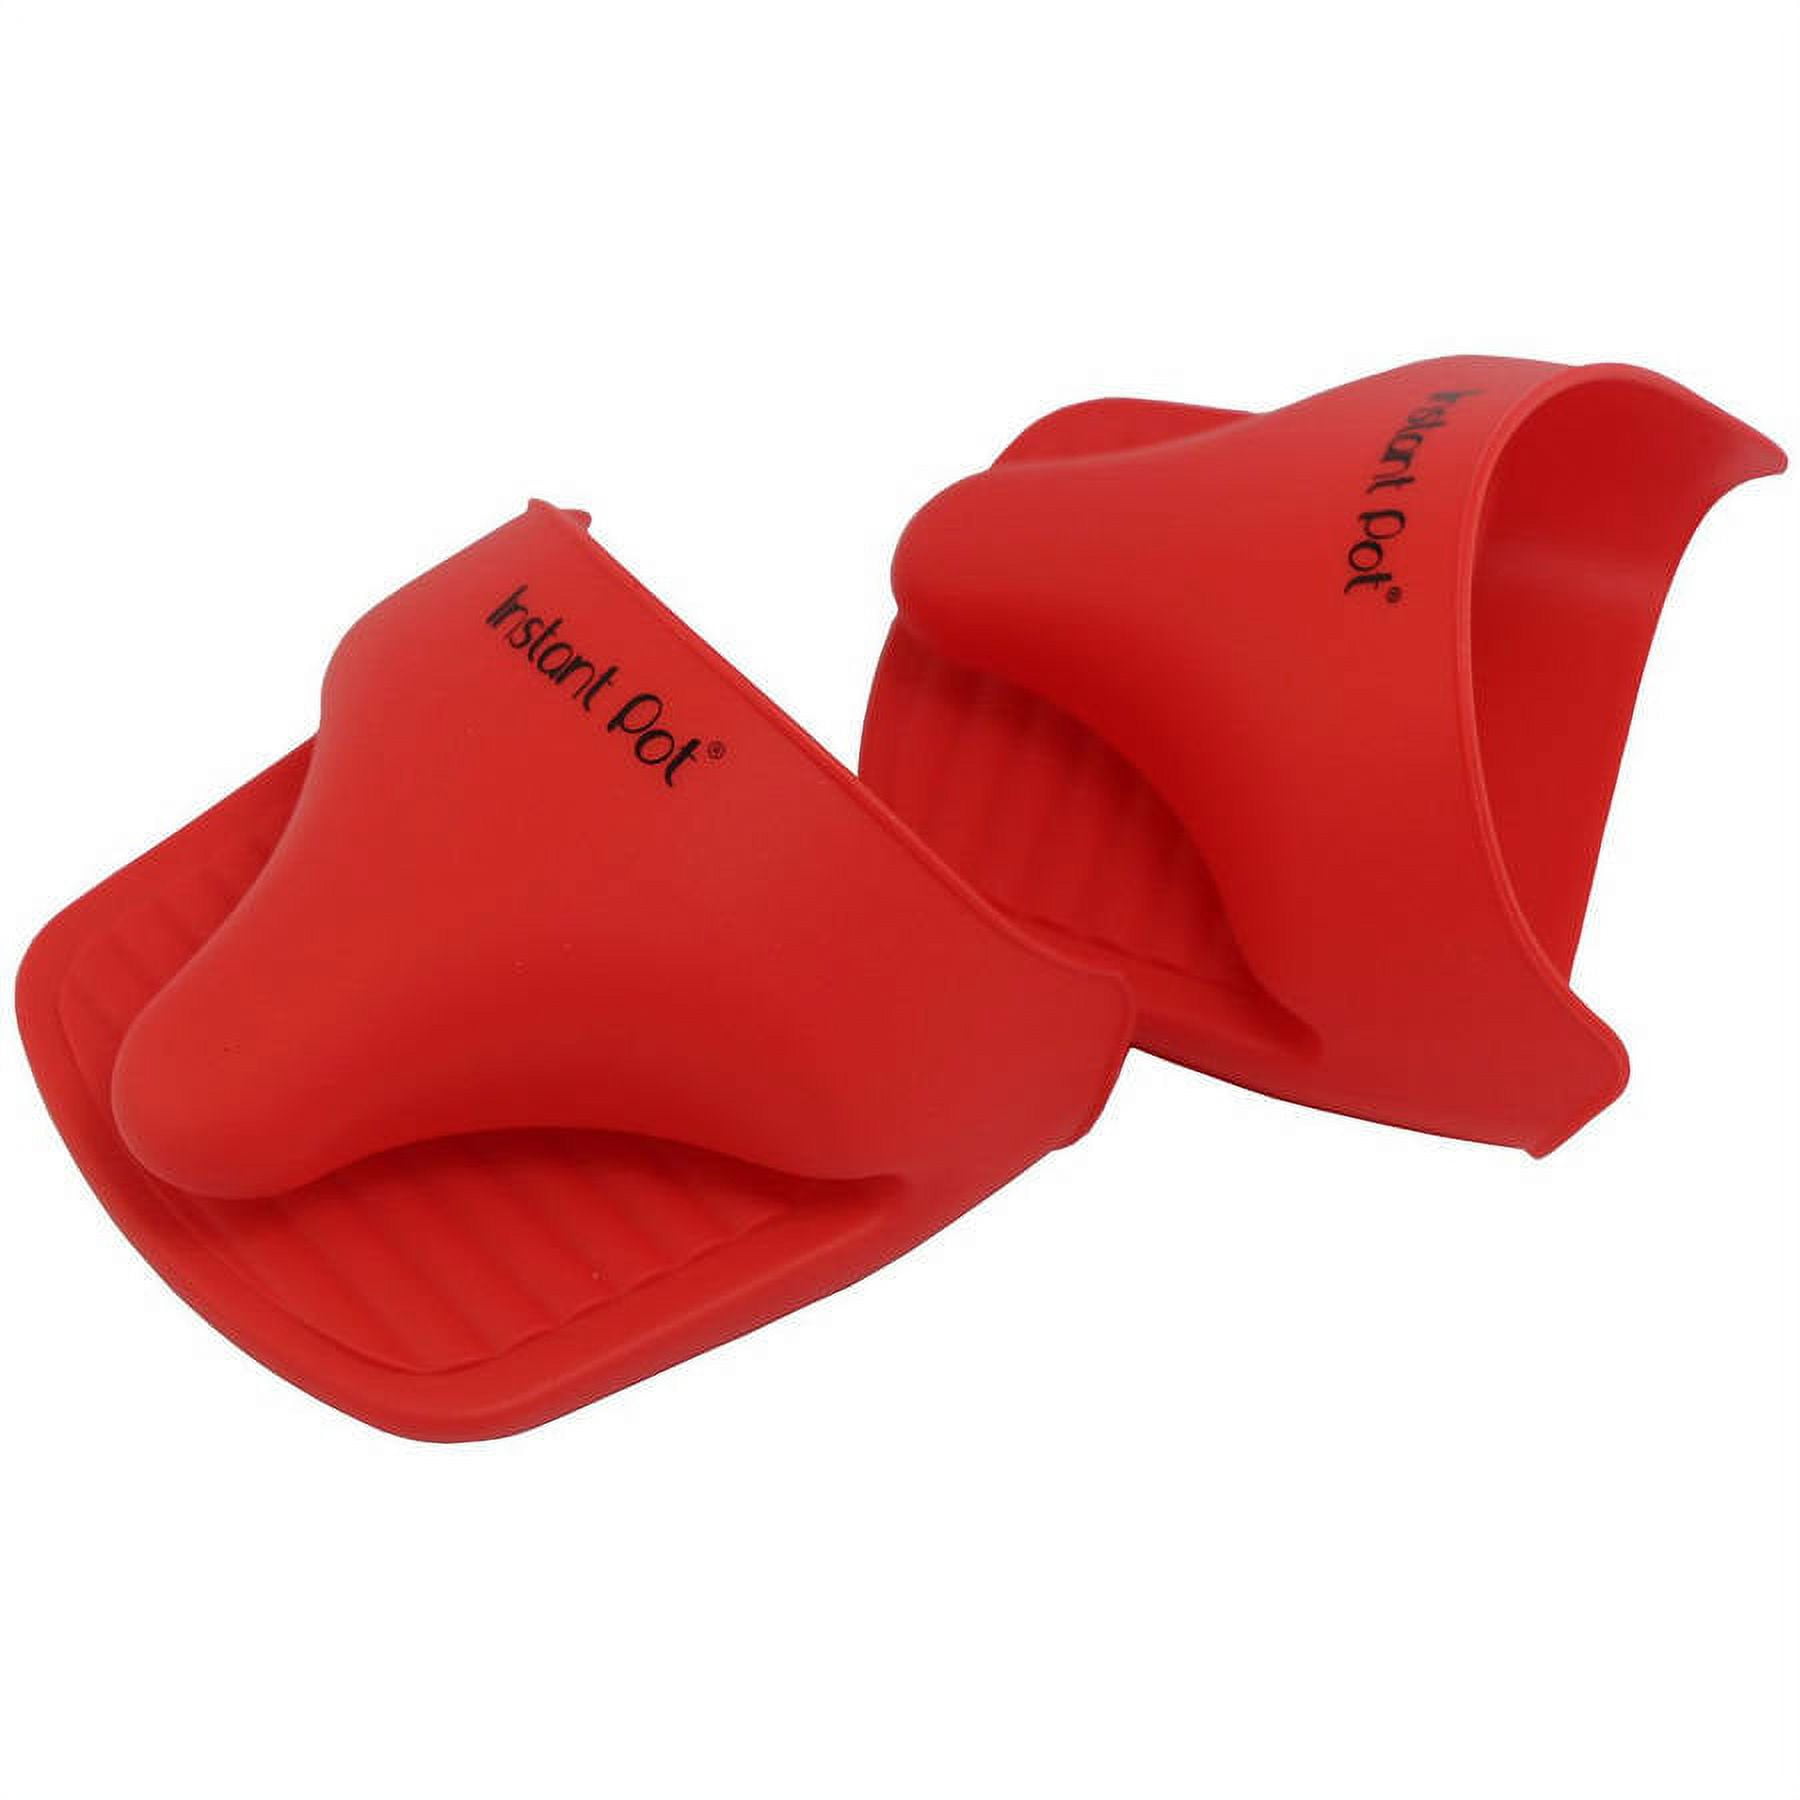 MIU France Set of 2 Silicone Pot Holders, Red